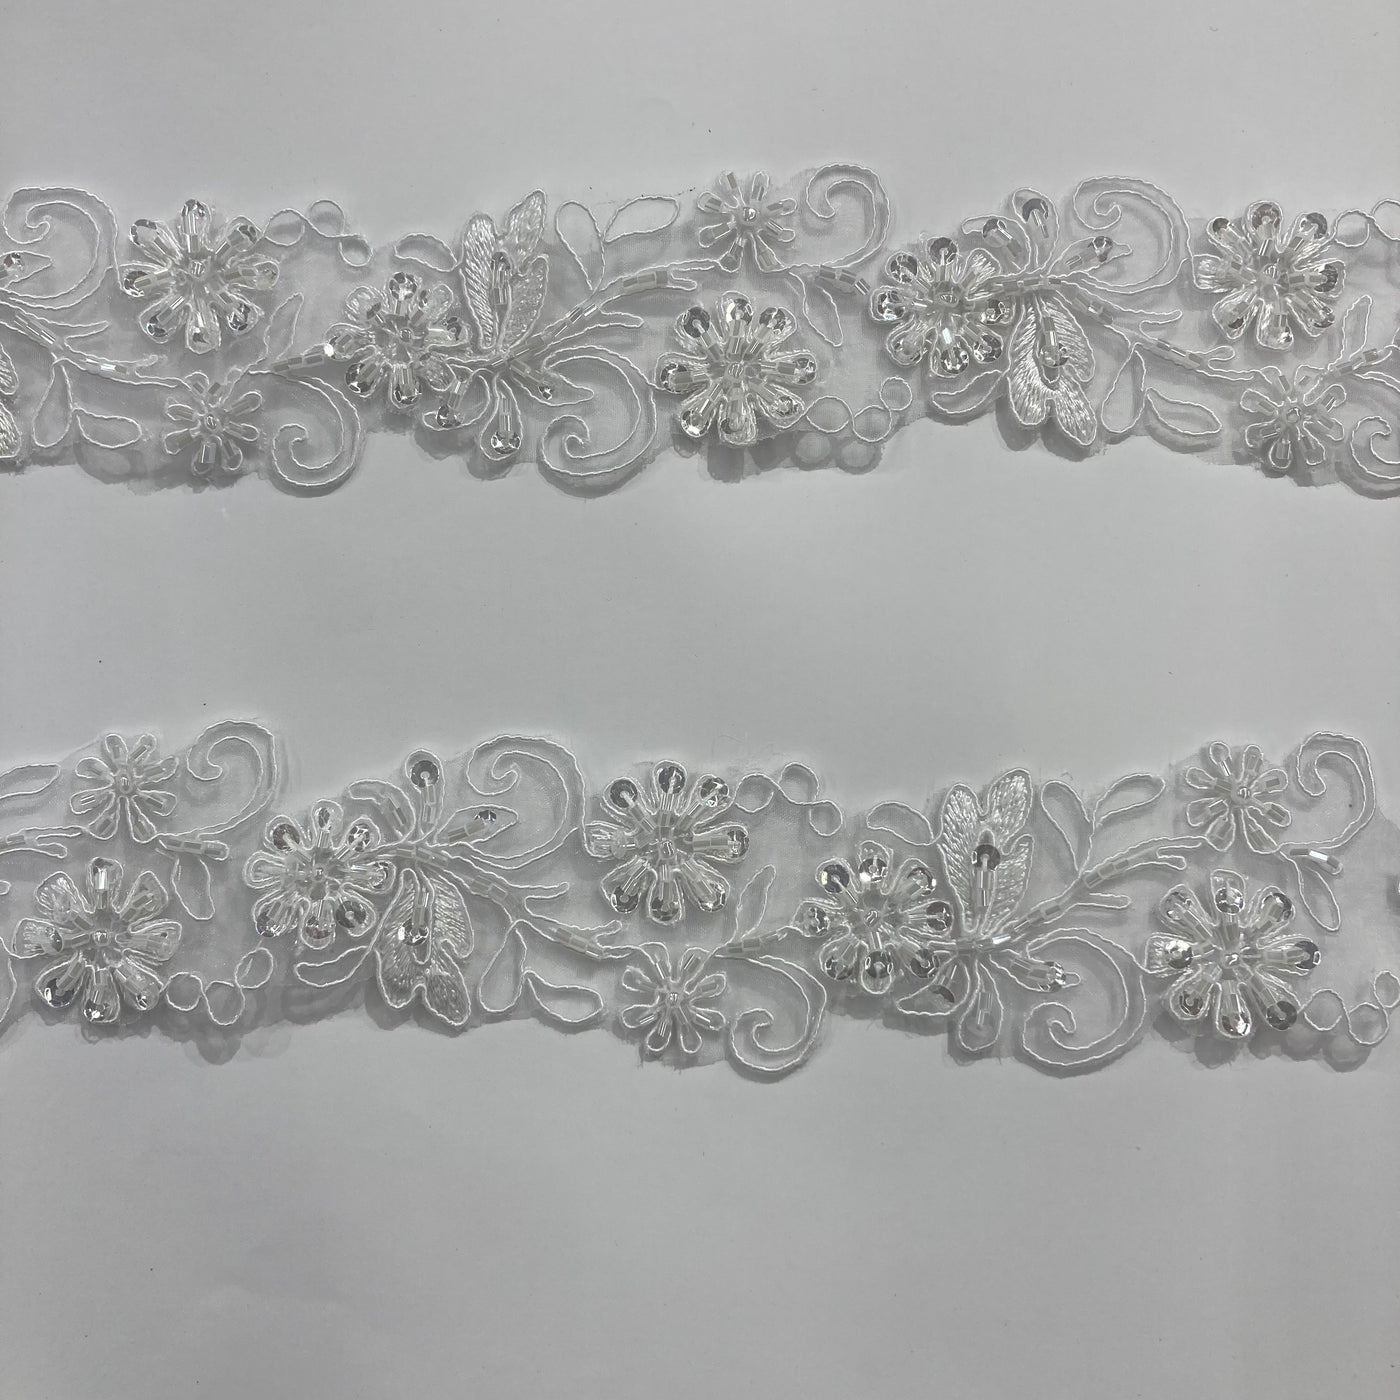 Beaded, Corded & Embroidered White Trimming. Lace Usa